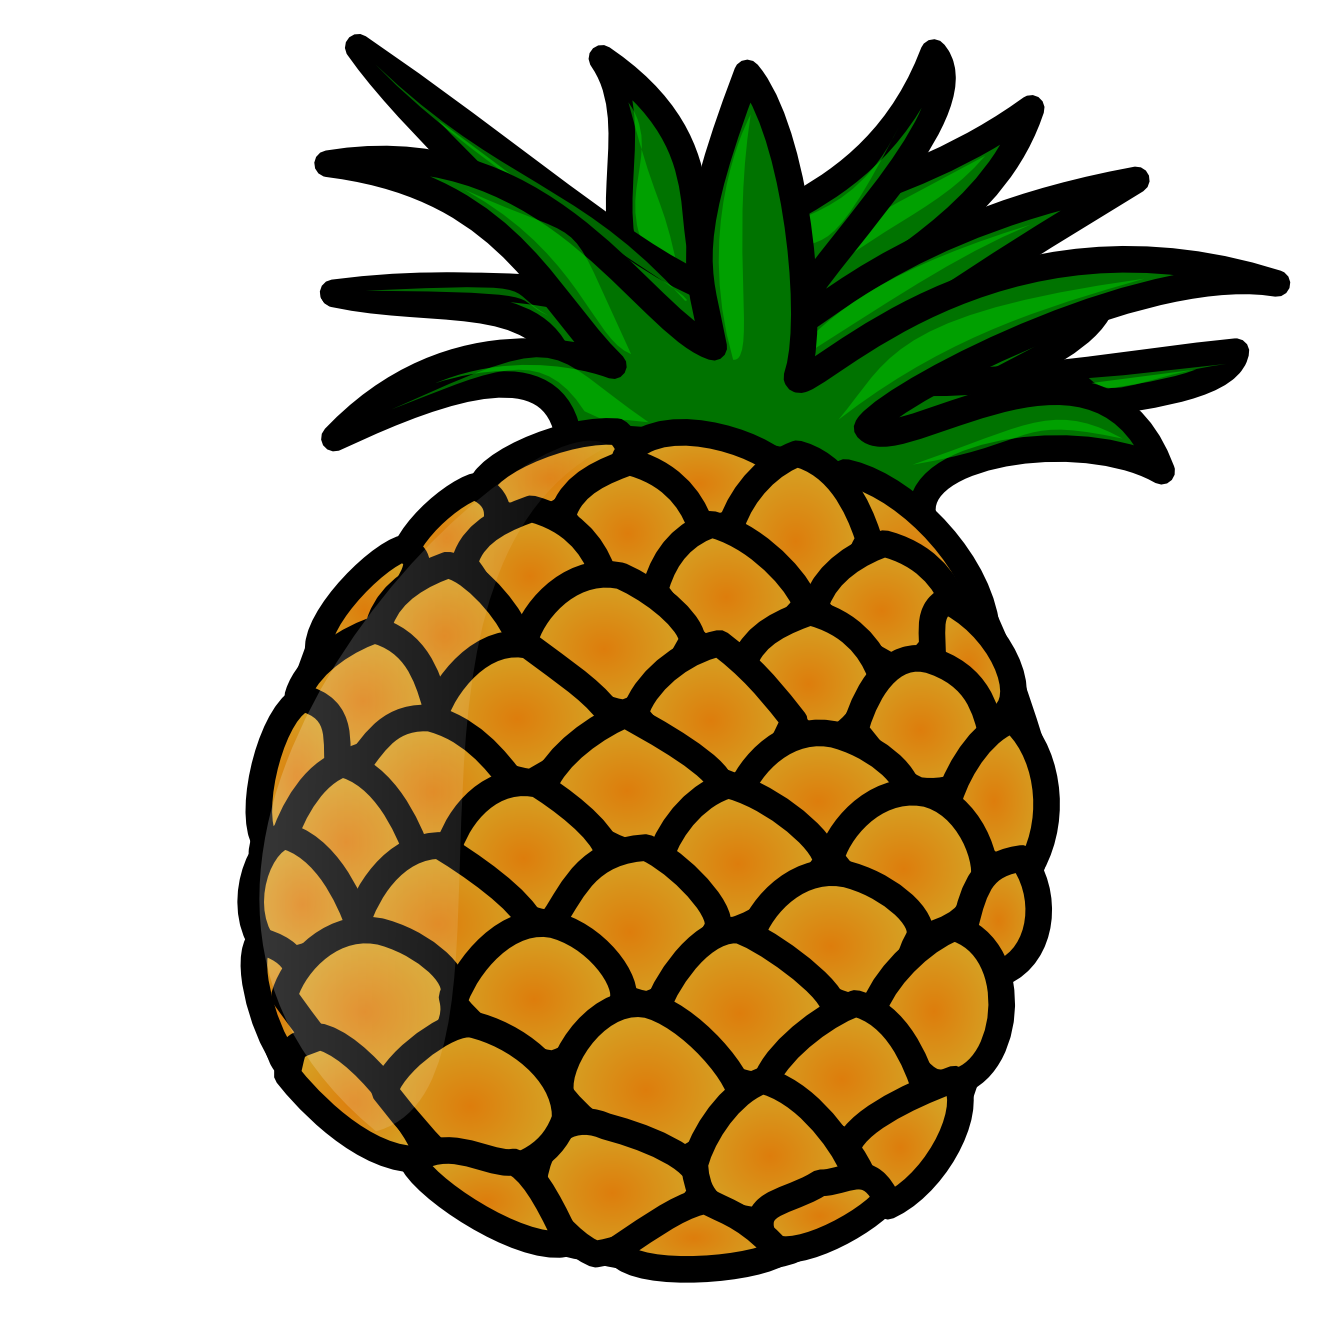 Pineapple clip art free free clipart images 2 clipartwiz